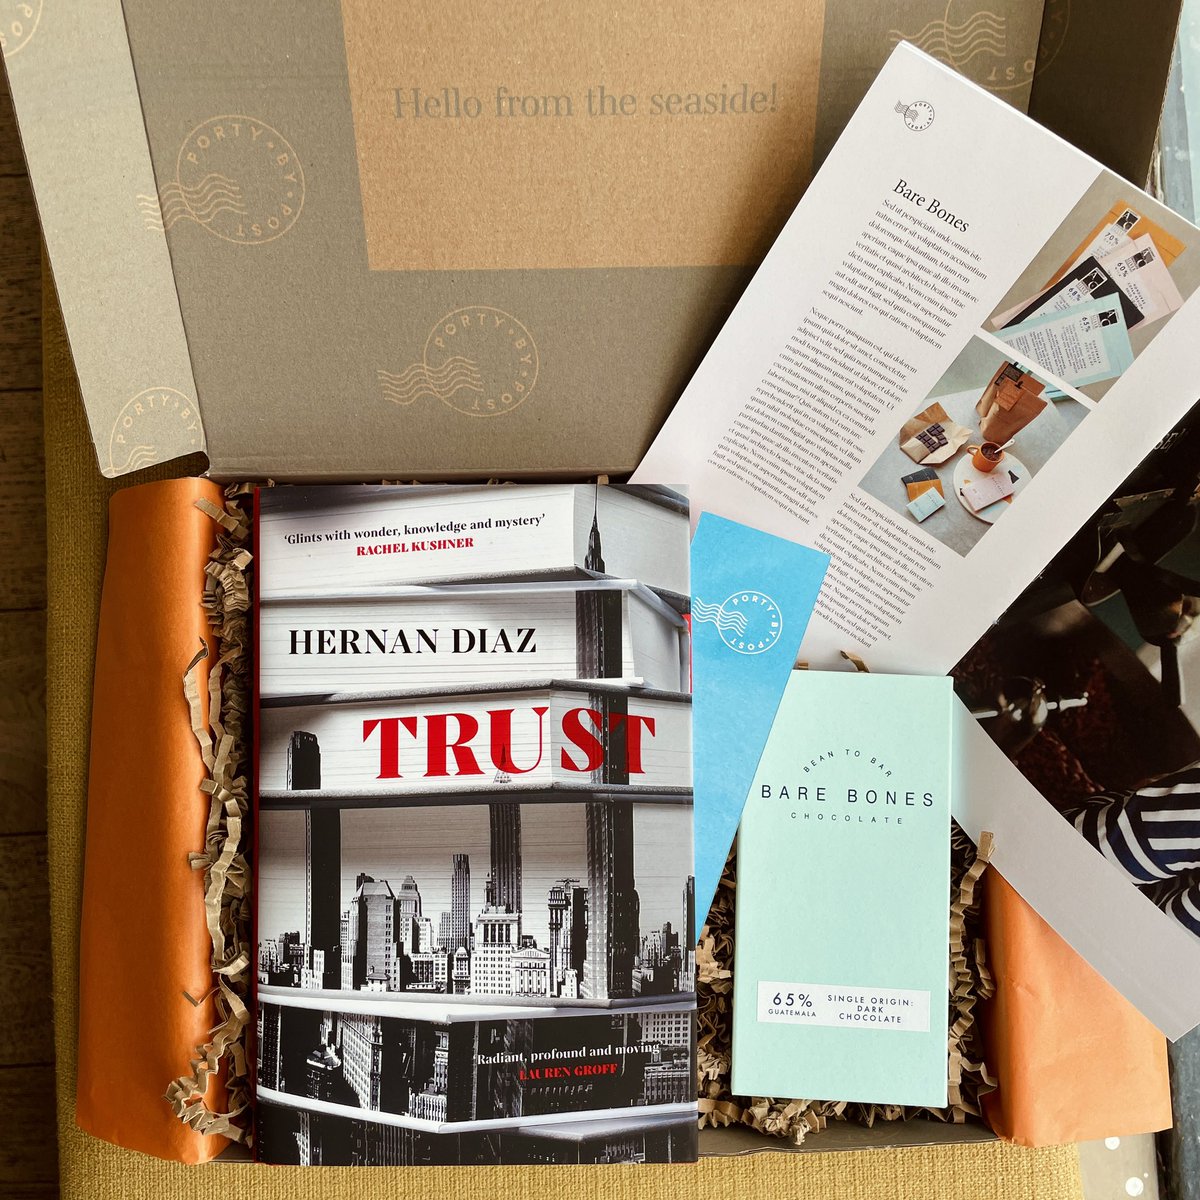 Our September #PortyByPost fiction box features the incredible Trust by Hernan Diaz! Subscribers will receive a signed first edition book & access to our online event with Hernan on Wed 21/09. Plus, a bar of delicious chocolate from @bareboneschoc! portybypost.com/fiction